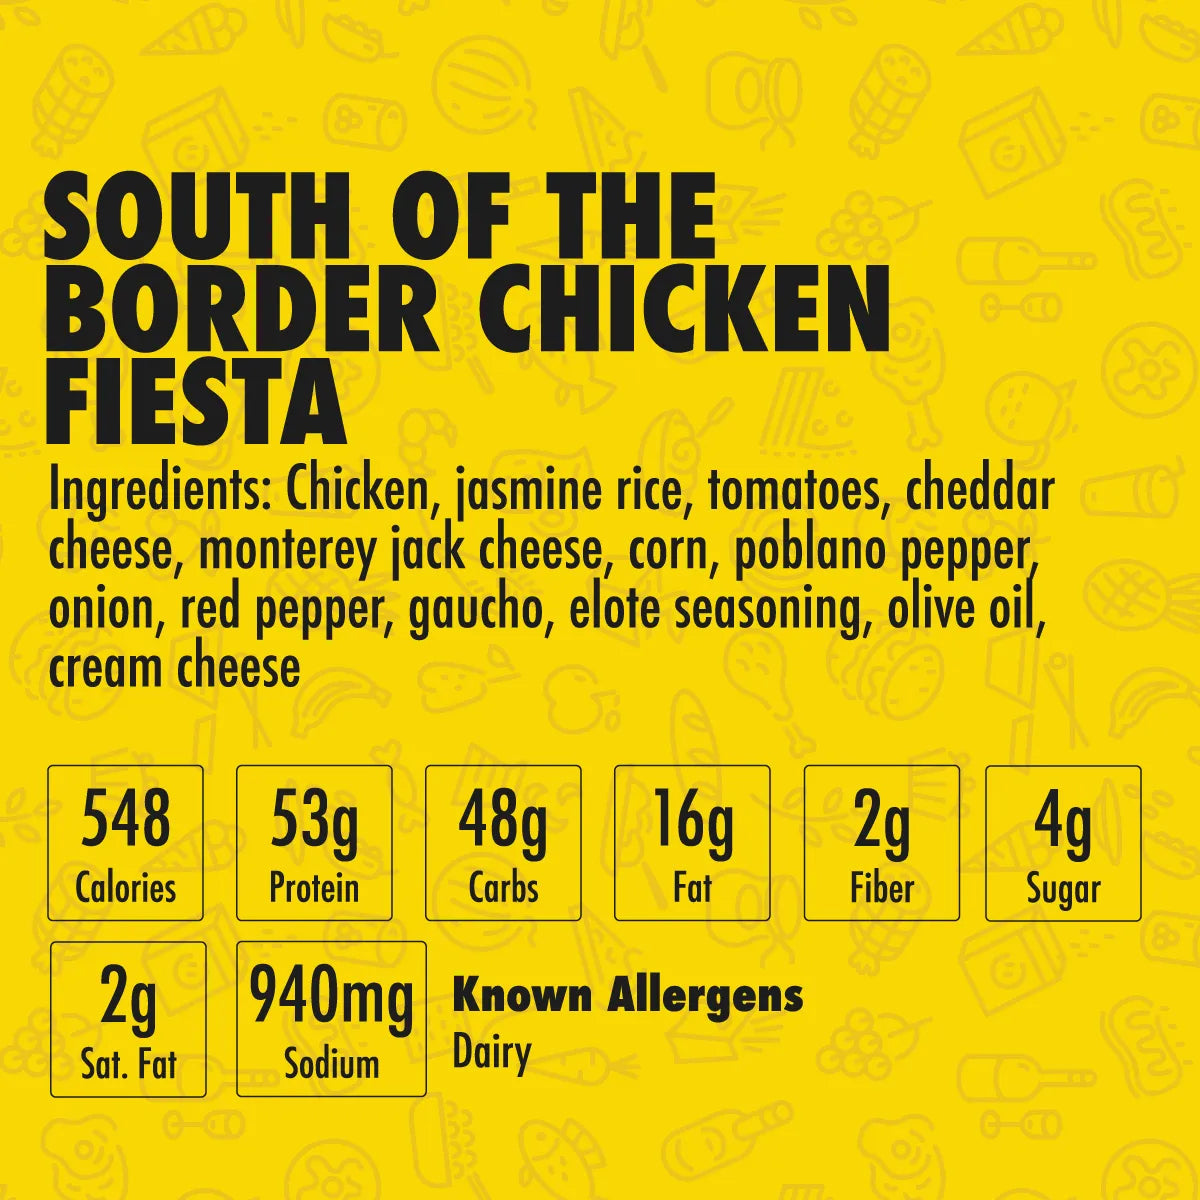 South of the Border Chicken Fiesta